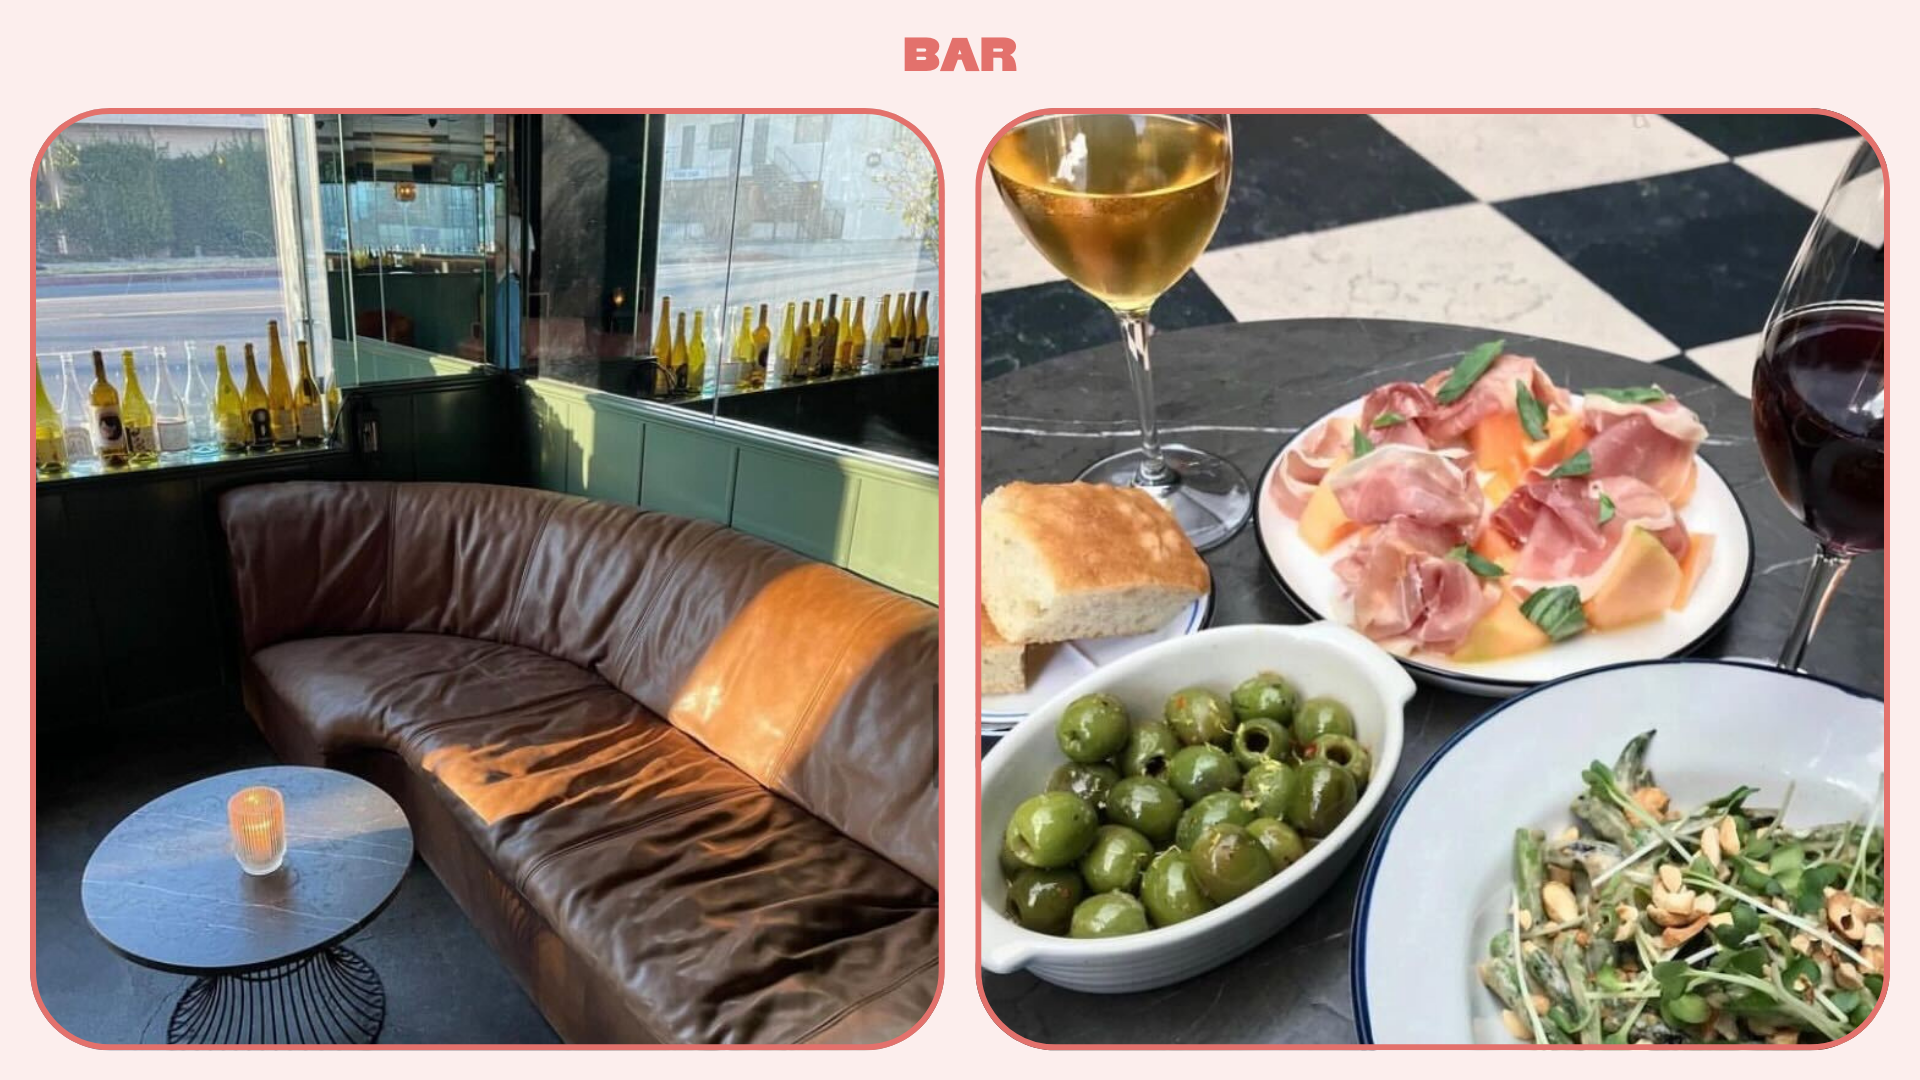 L: Interior of Lolo Wine Bar LA featuring a leather couch looking out onto an LA street. R: Plates of olives, melon, ham and wine